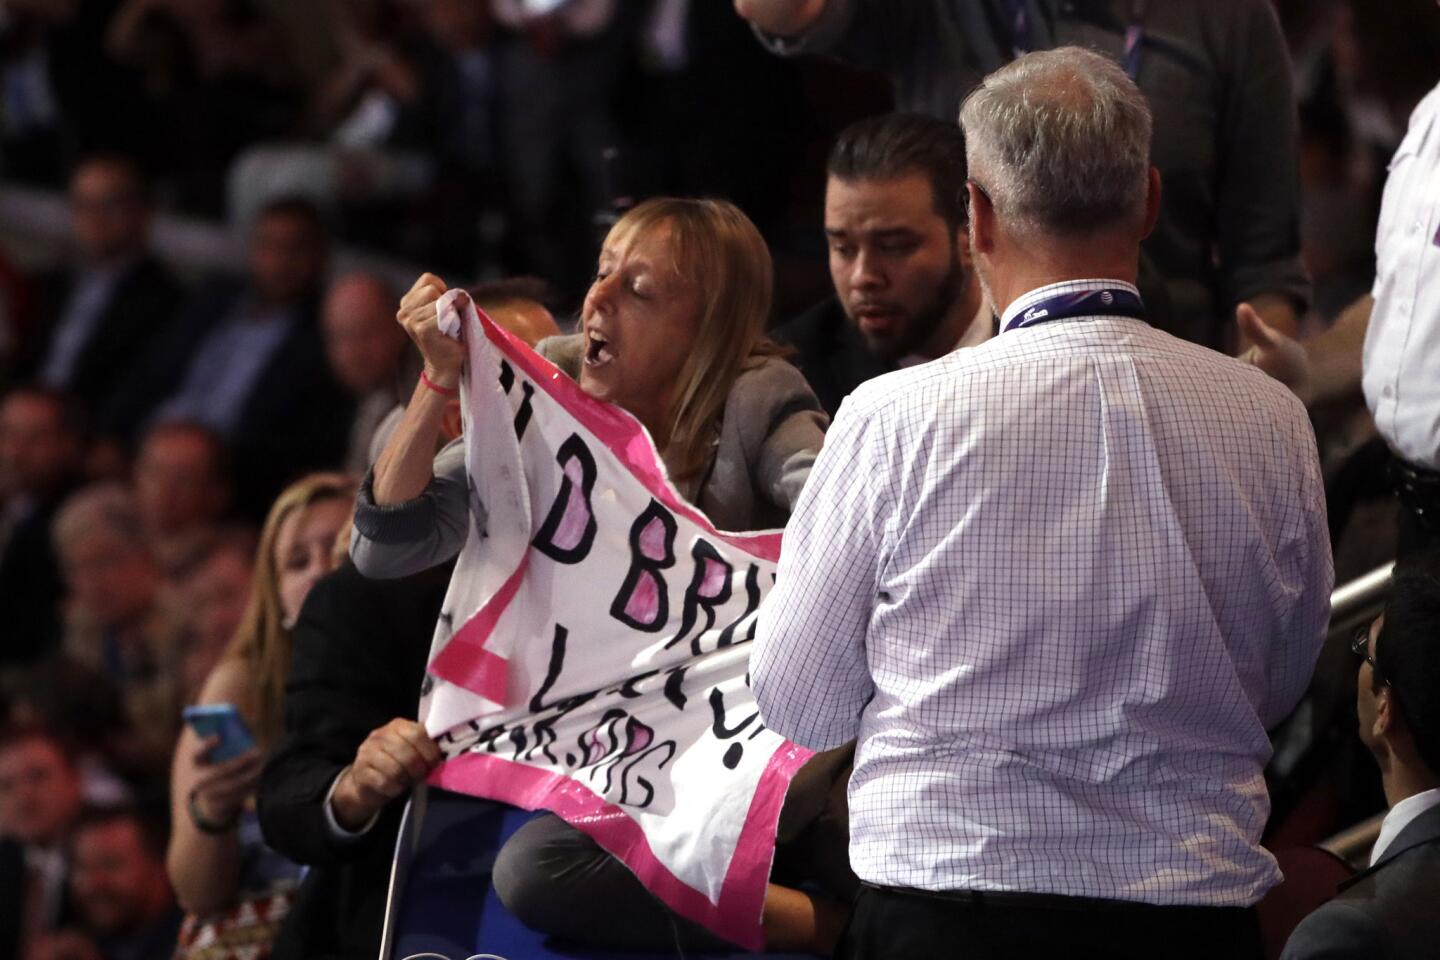 Convention protester